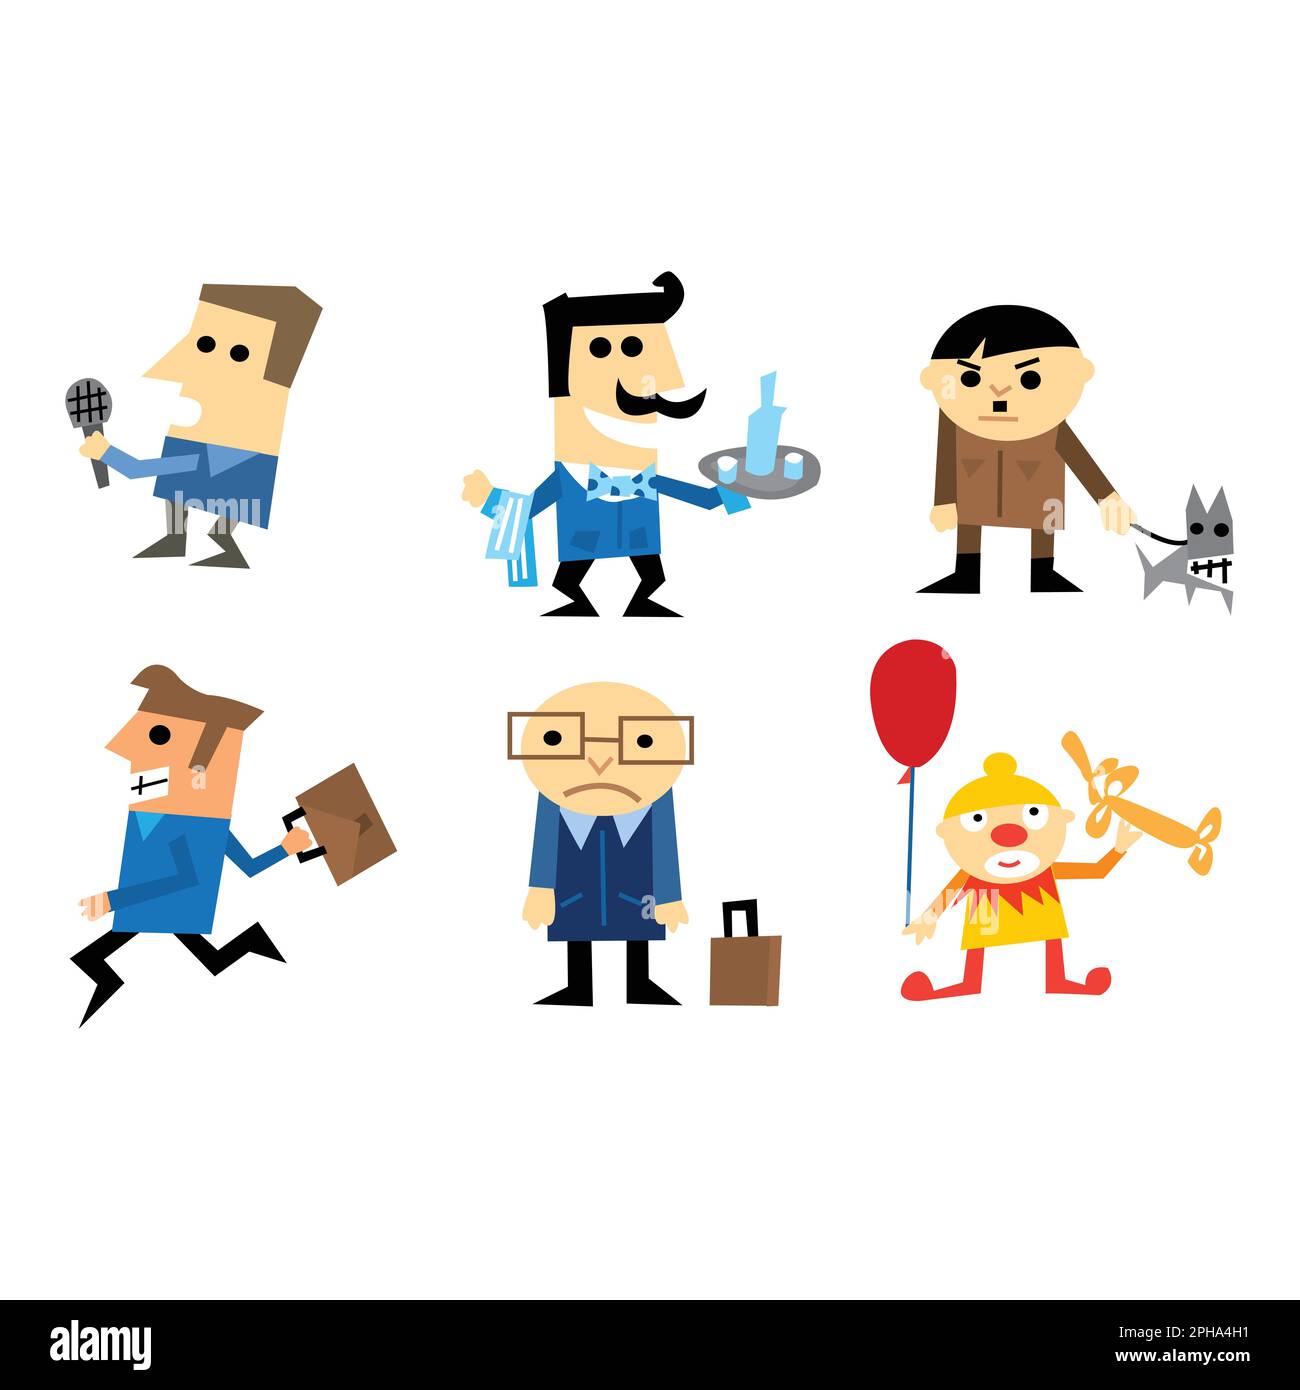 Set of cartoon people in different situations. Vector illustration isolated on white background. Stock Vector